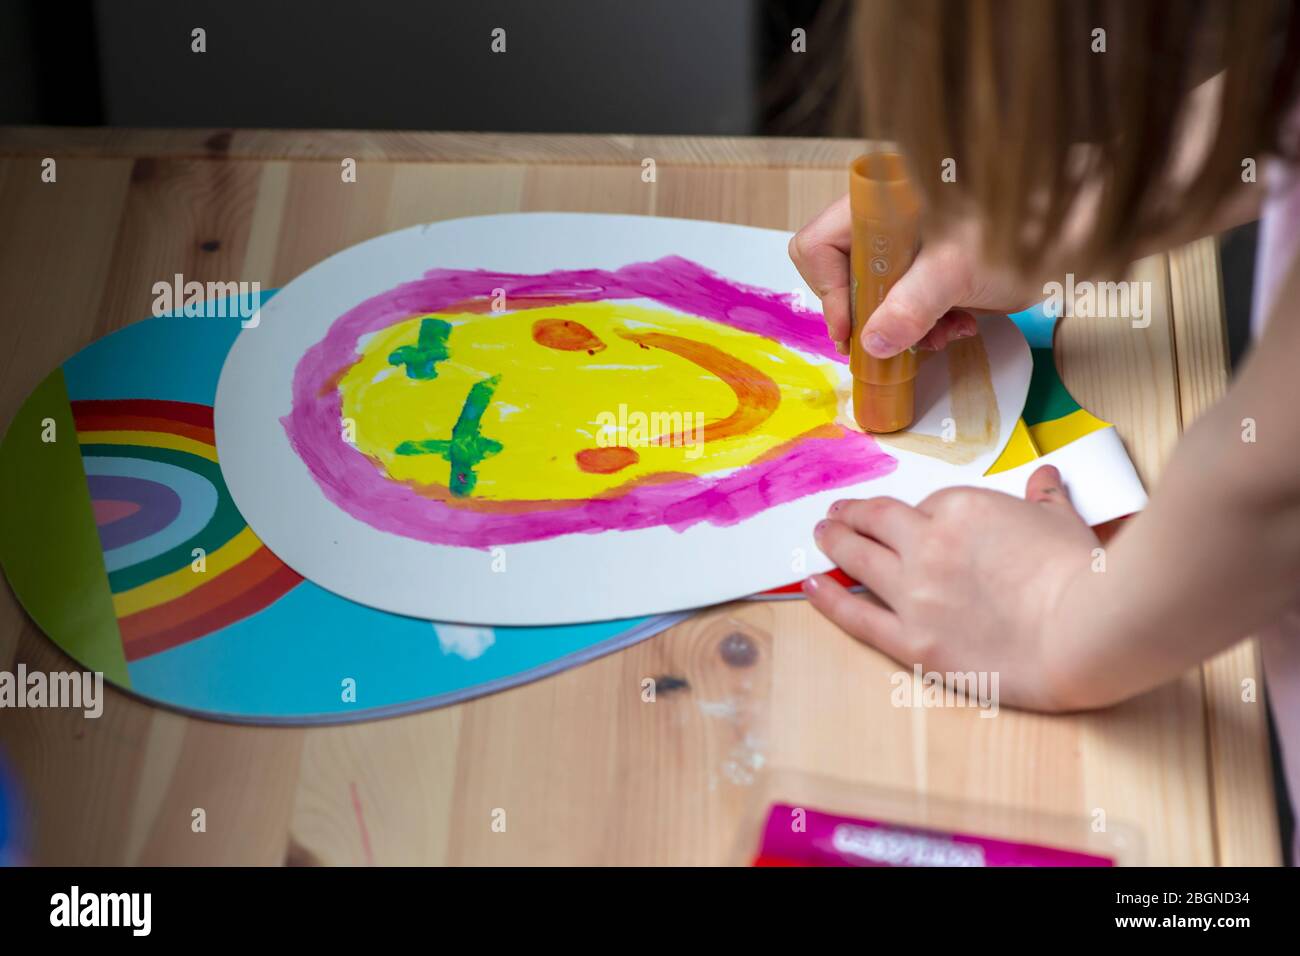 A young girl paints a smiley face while home schooling Stock Photo